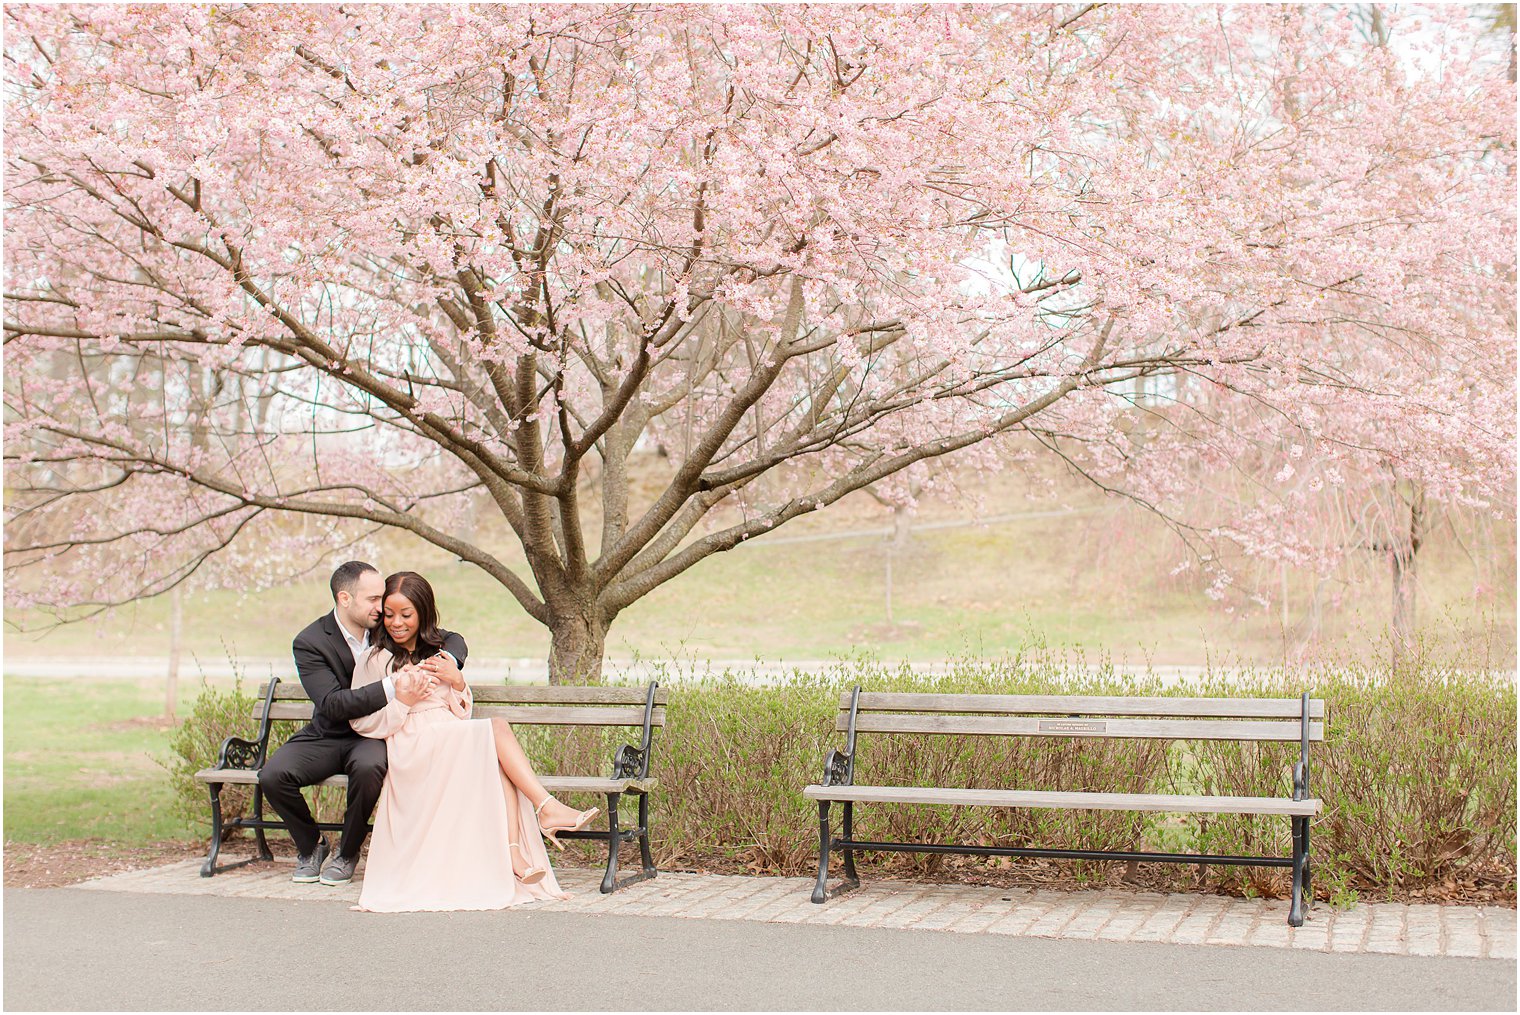 Where to See Cherry Blossoms in North Jersey - Montclair Girl